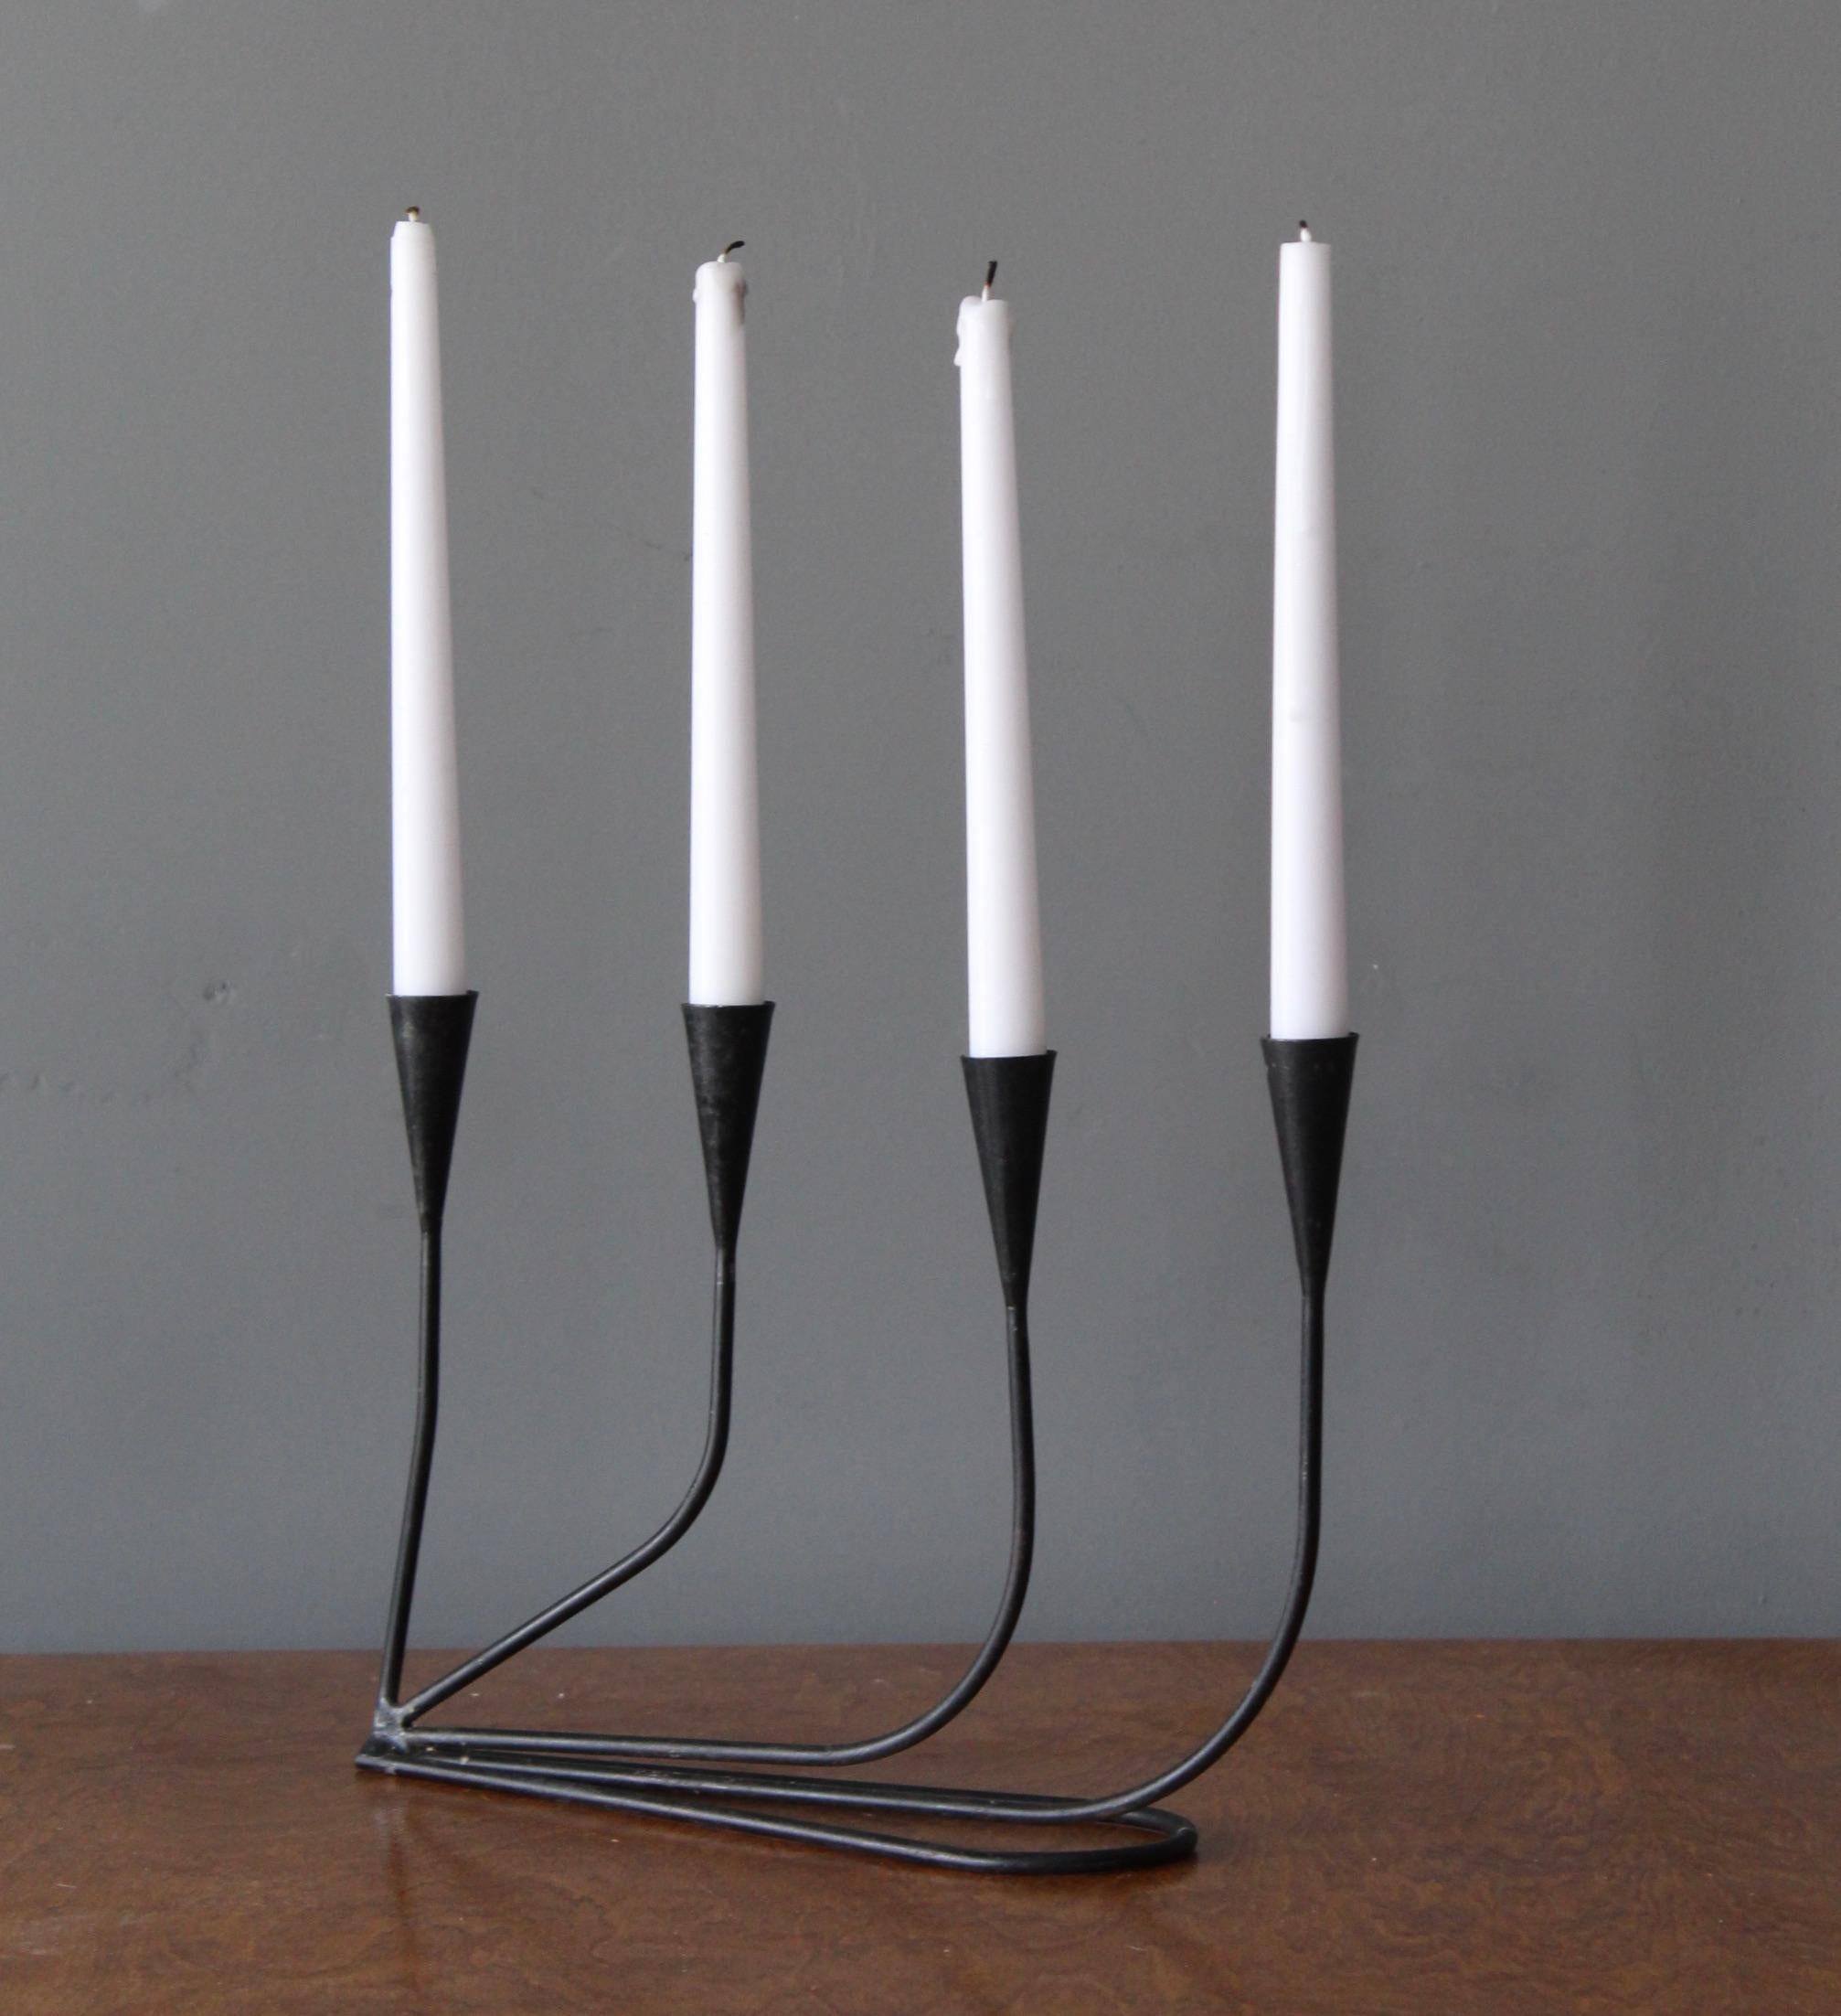 A four-armed candelabra. Made in Sweden, c. 1940s-1950s.